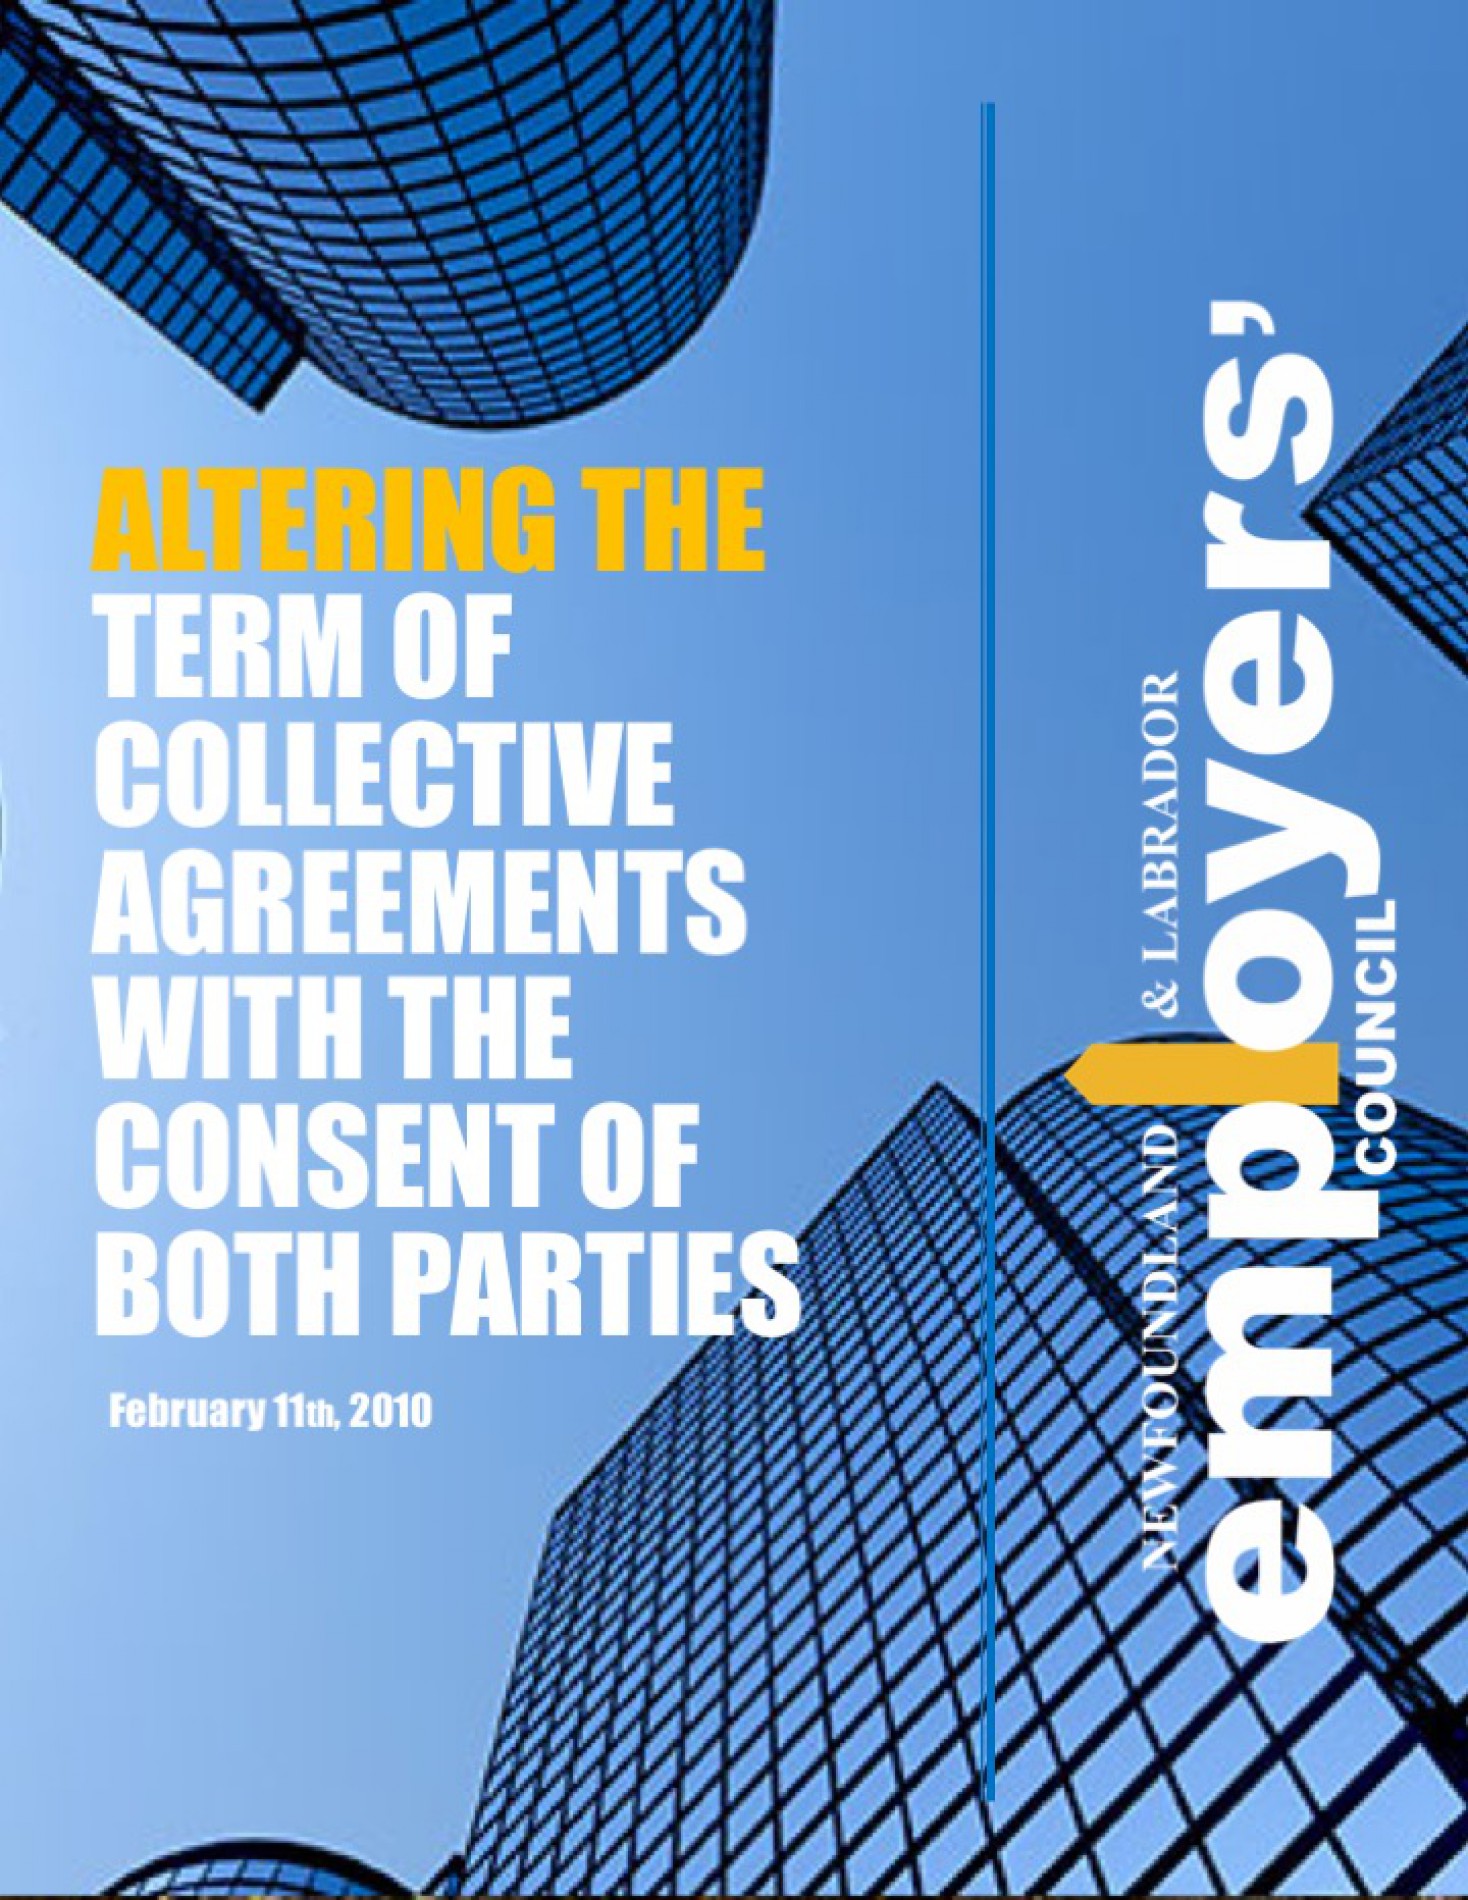 Altering the Term of Collective Agreements with Consent of Both Parties